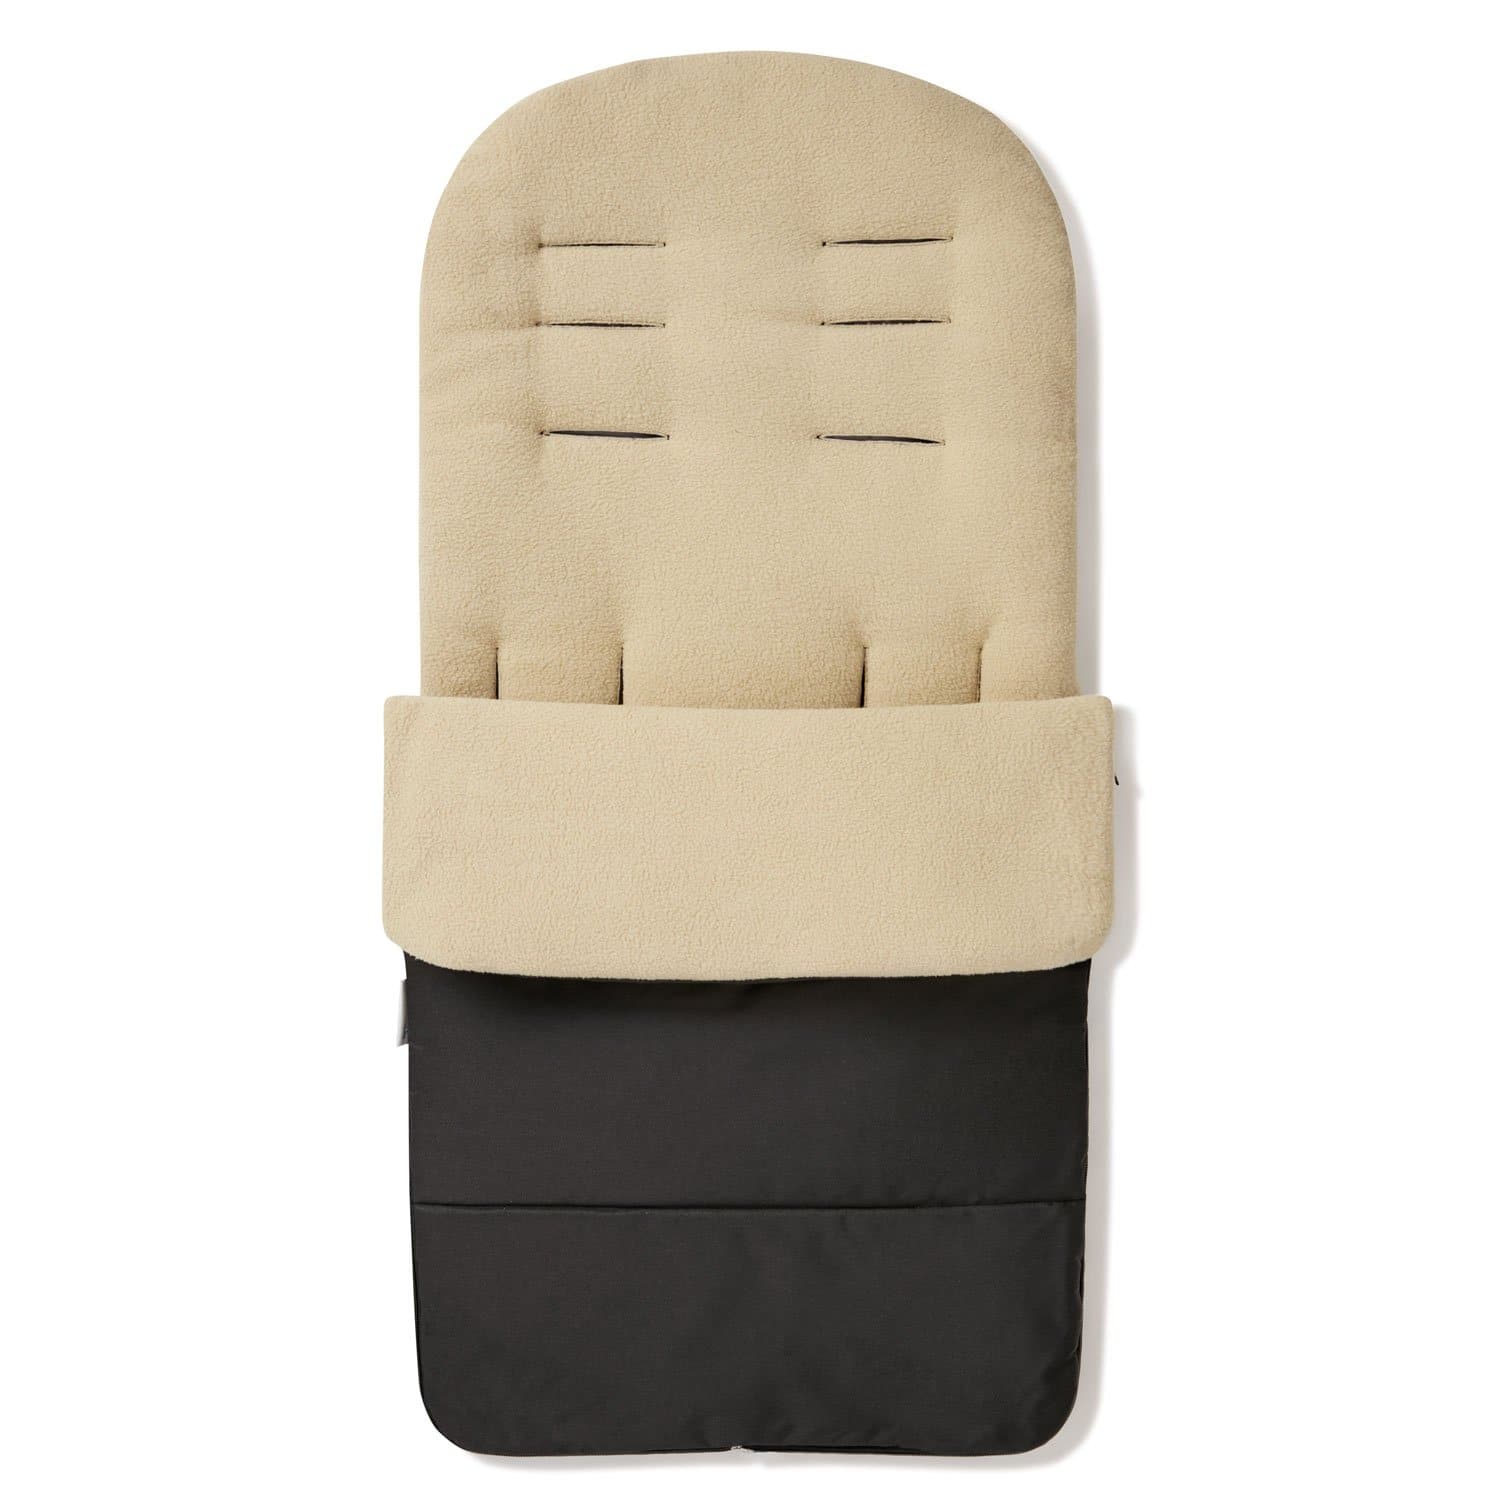 Premium Footmuff / Cosy Toes Compatible with Little Shield - Desert Sand / Fits All Models | For Your Little One